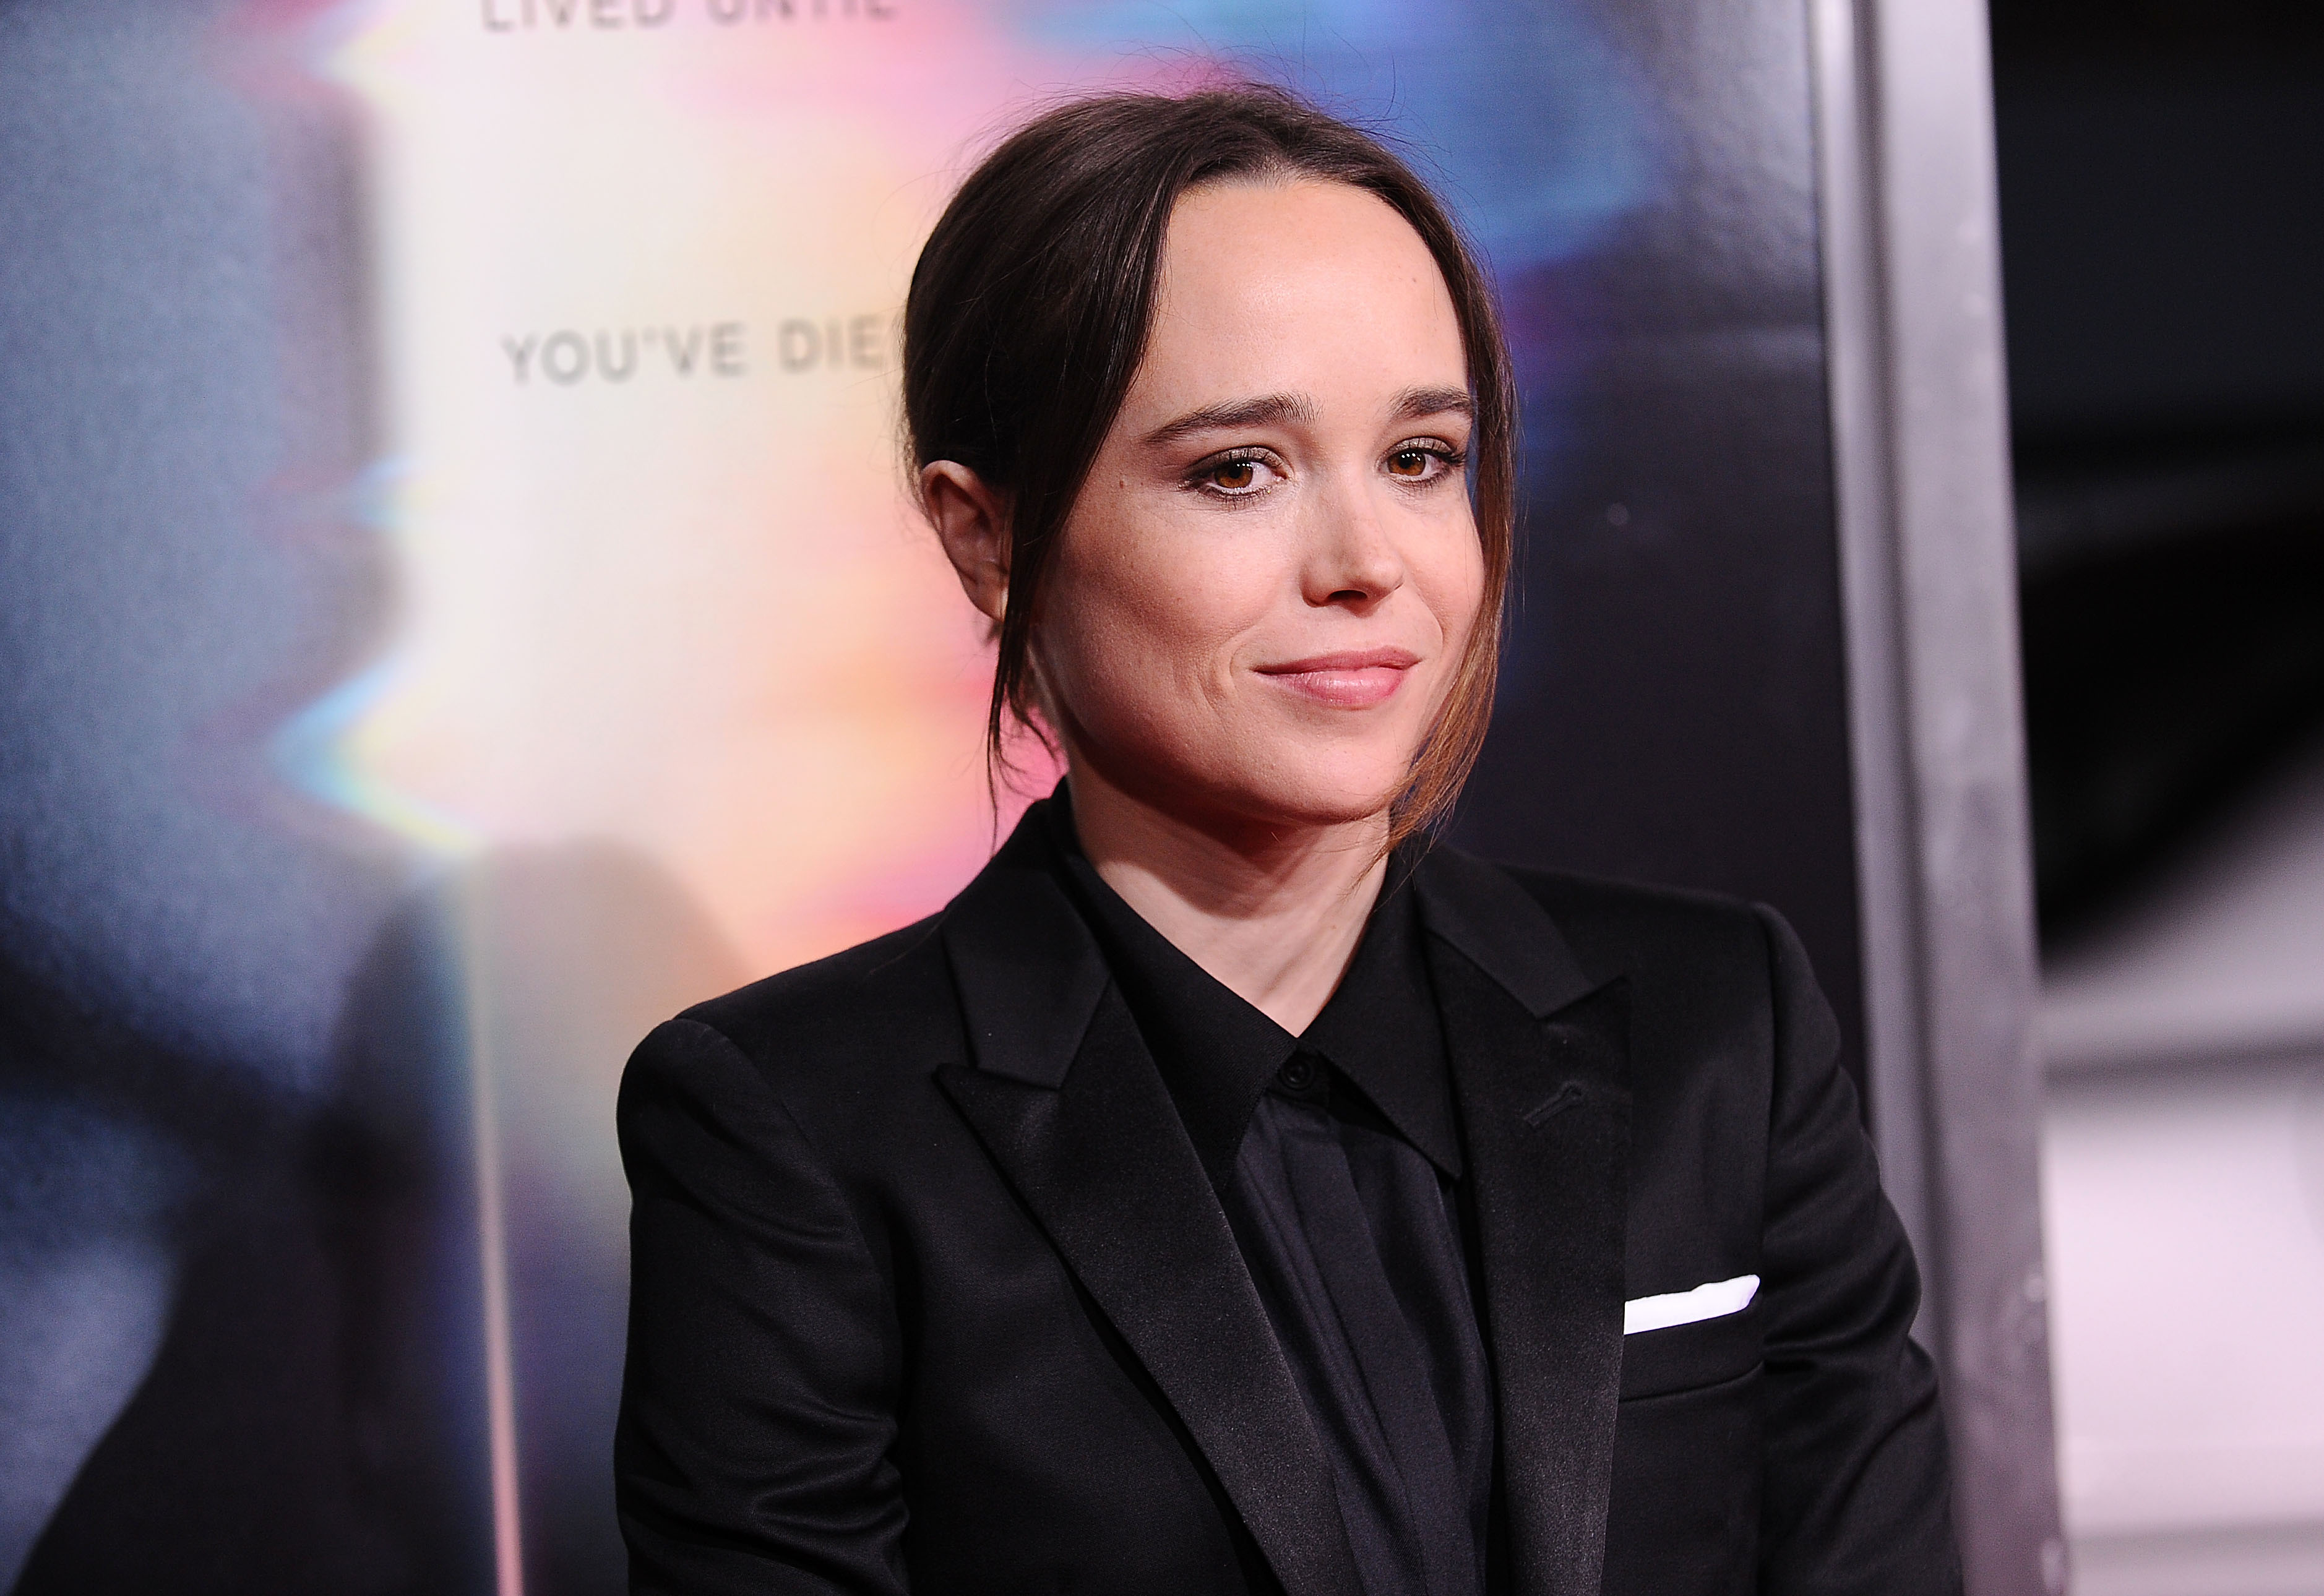 LOS ANGELES, CA - SEPTEMBER 27: Actress Ellen Page attends the premiere of 